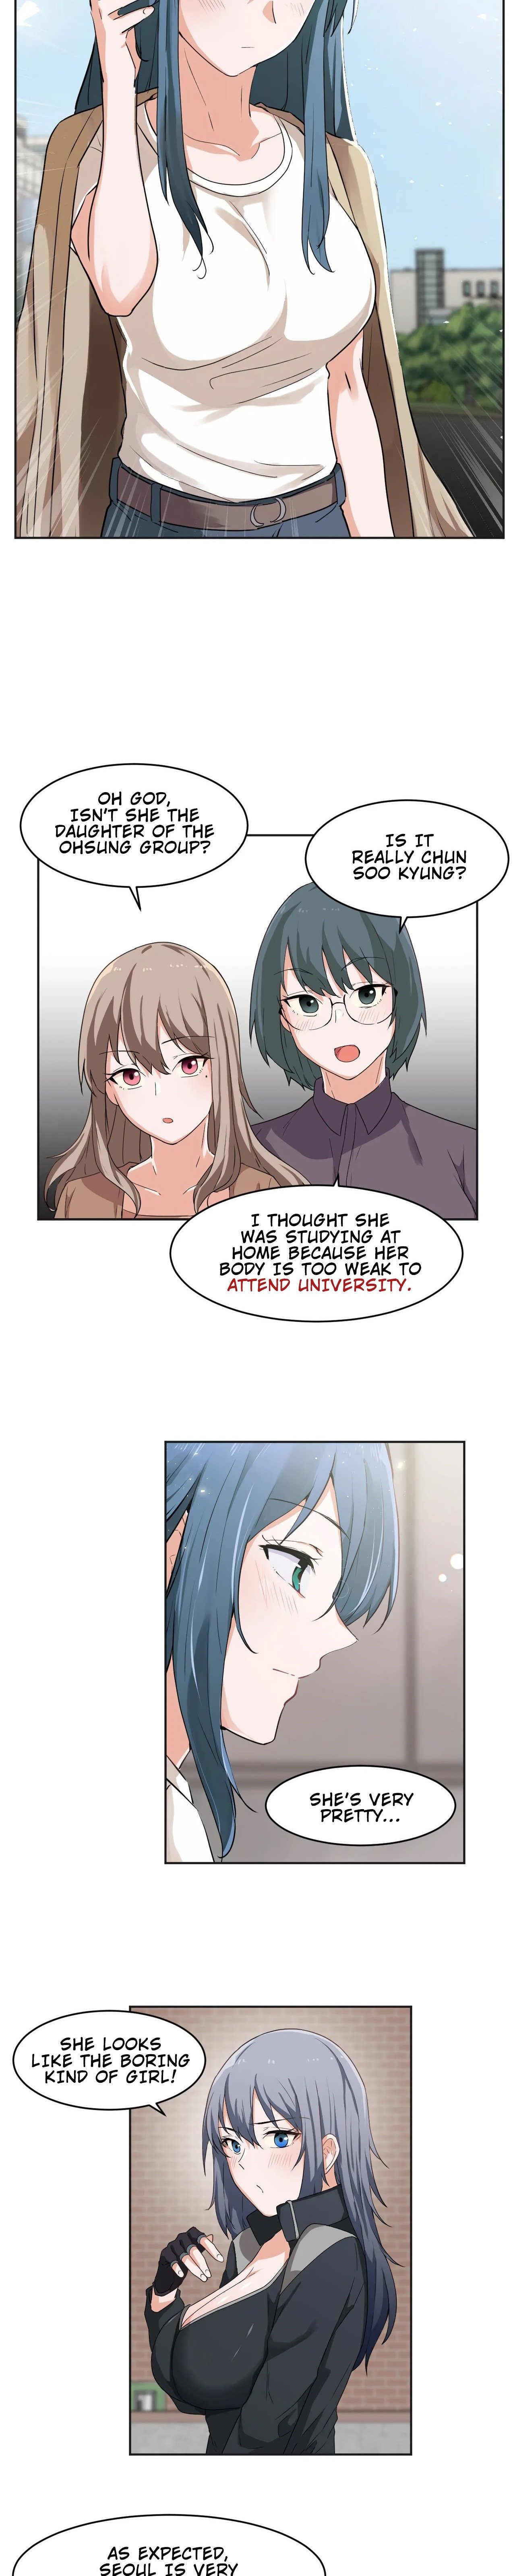 i-wanna-be-a-daughter-thief-chap-3-20